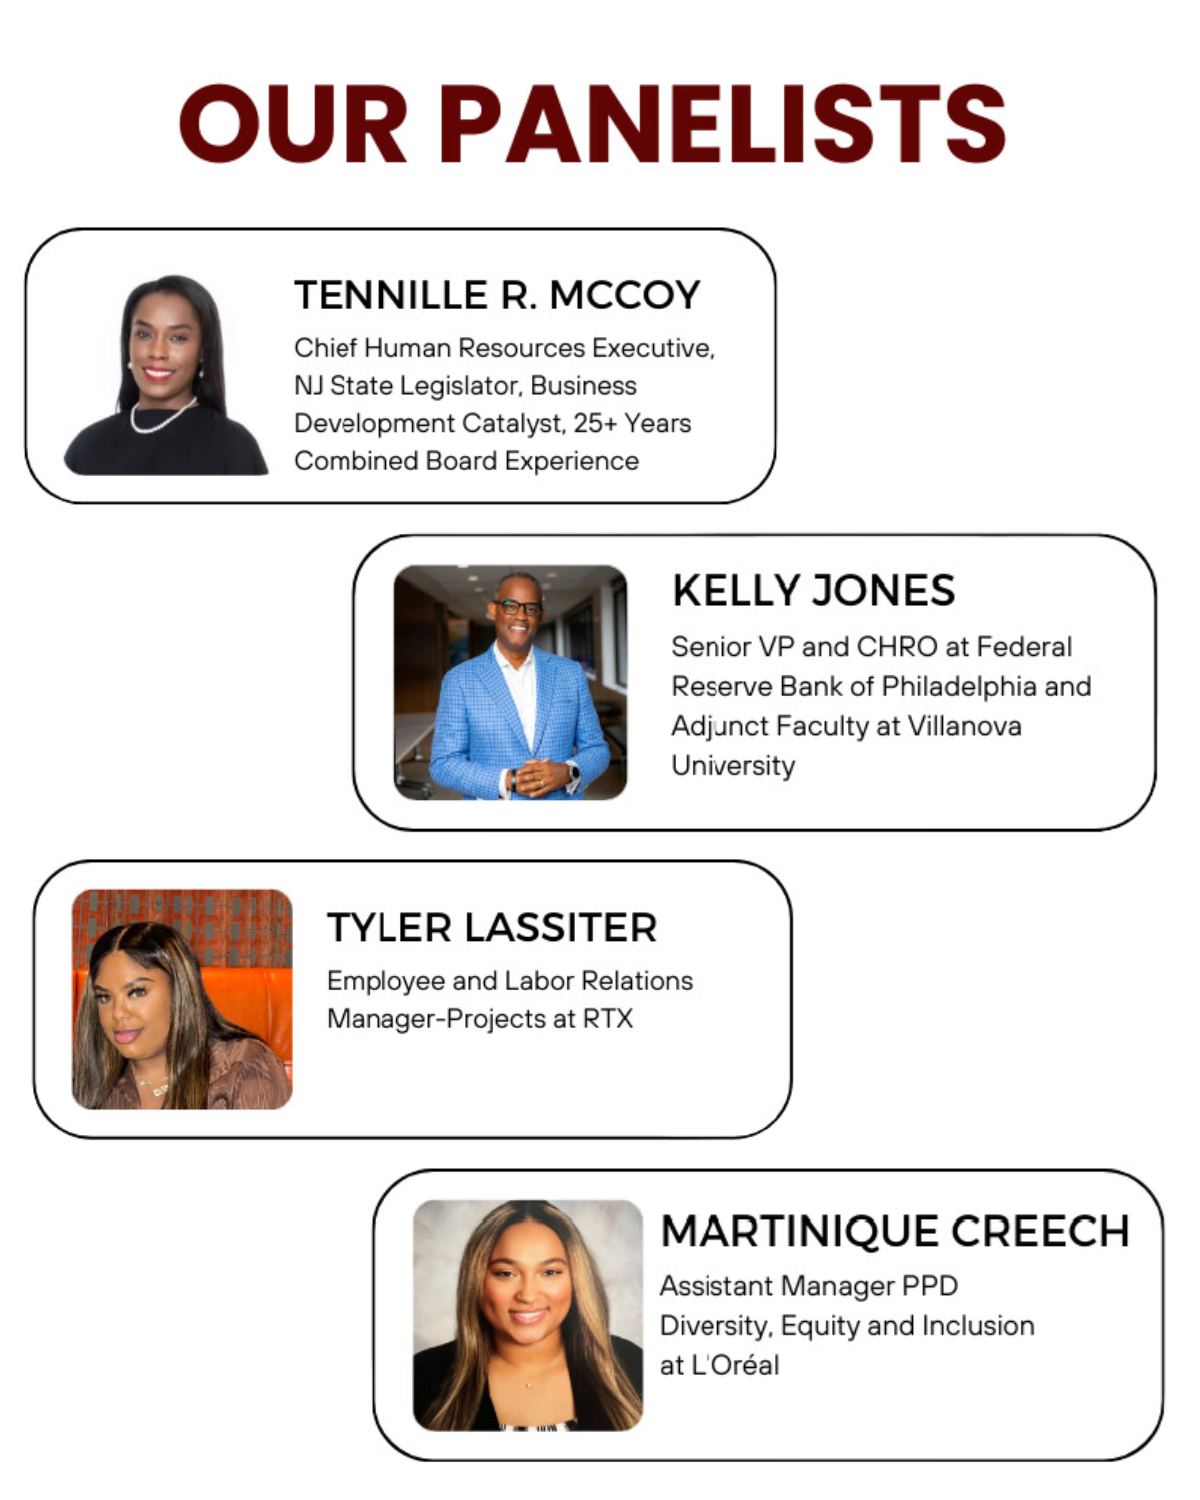 Image of Panelists for Voices of Impact event